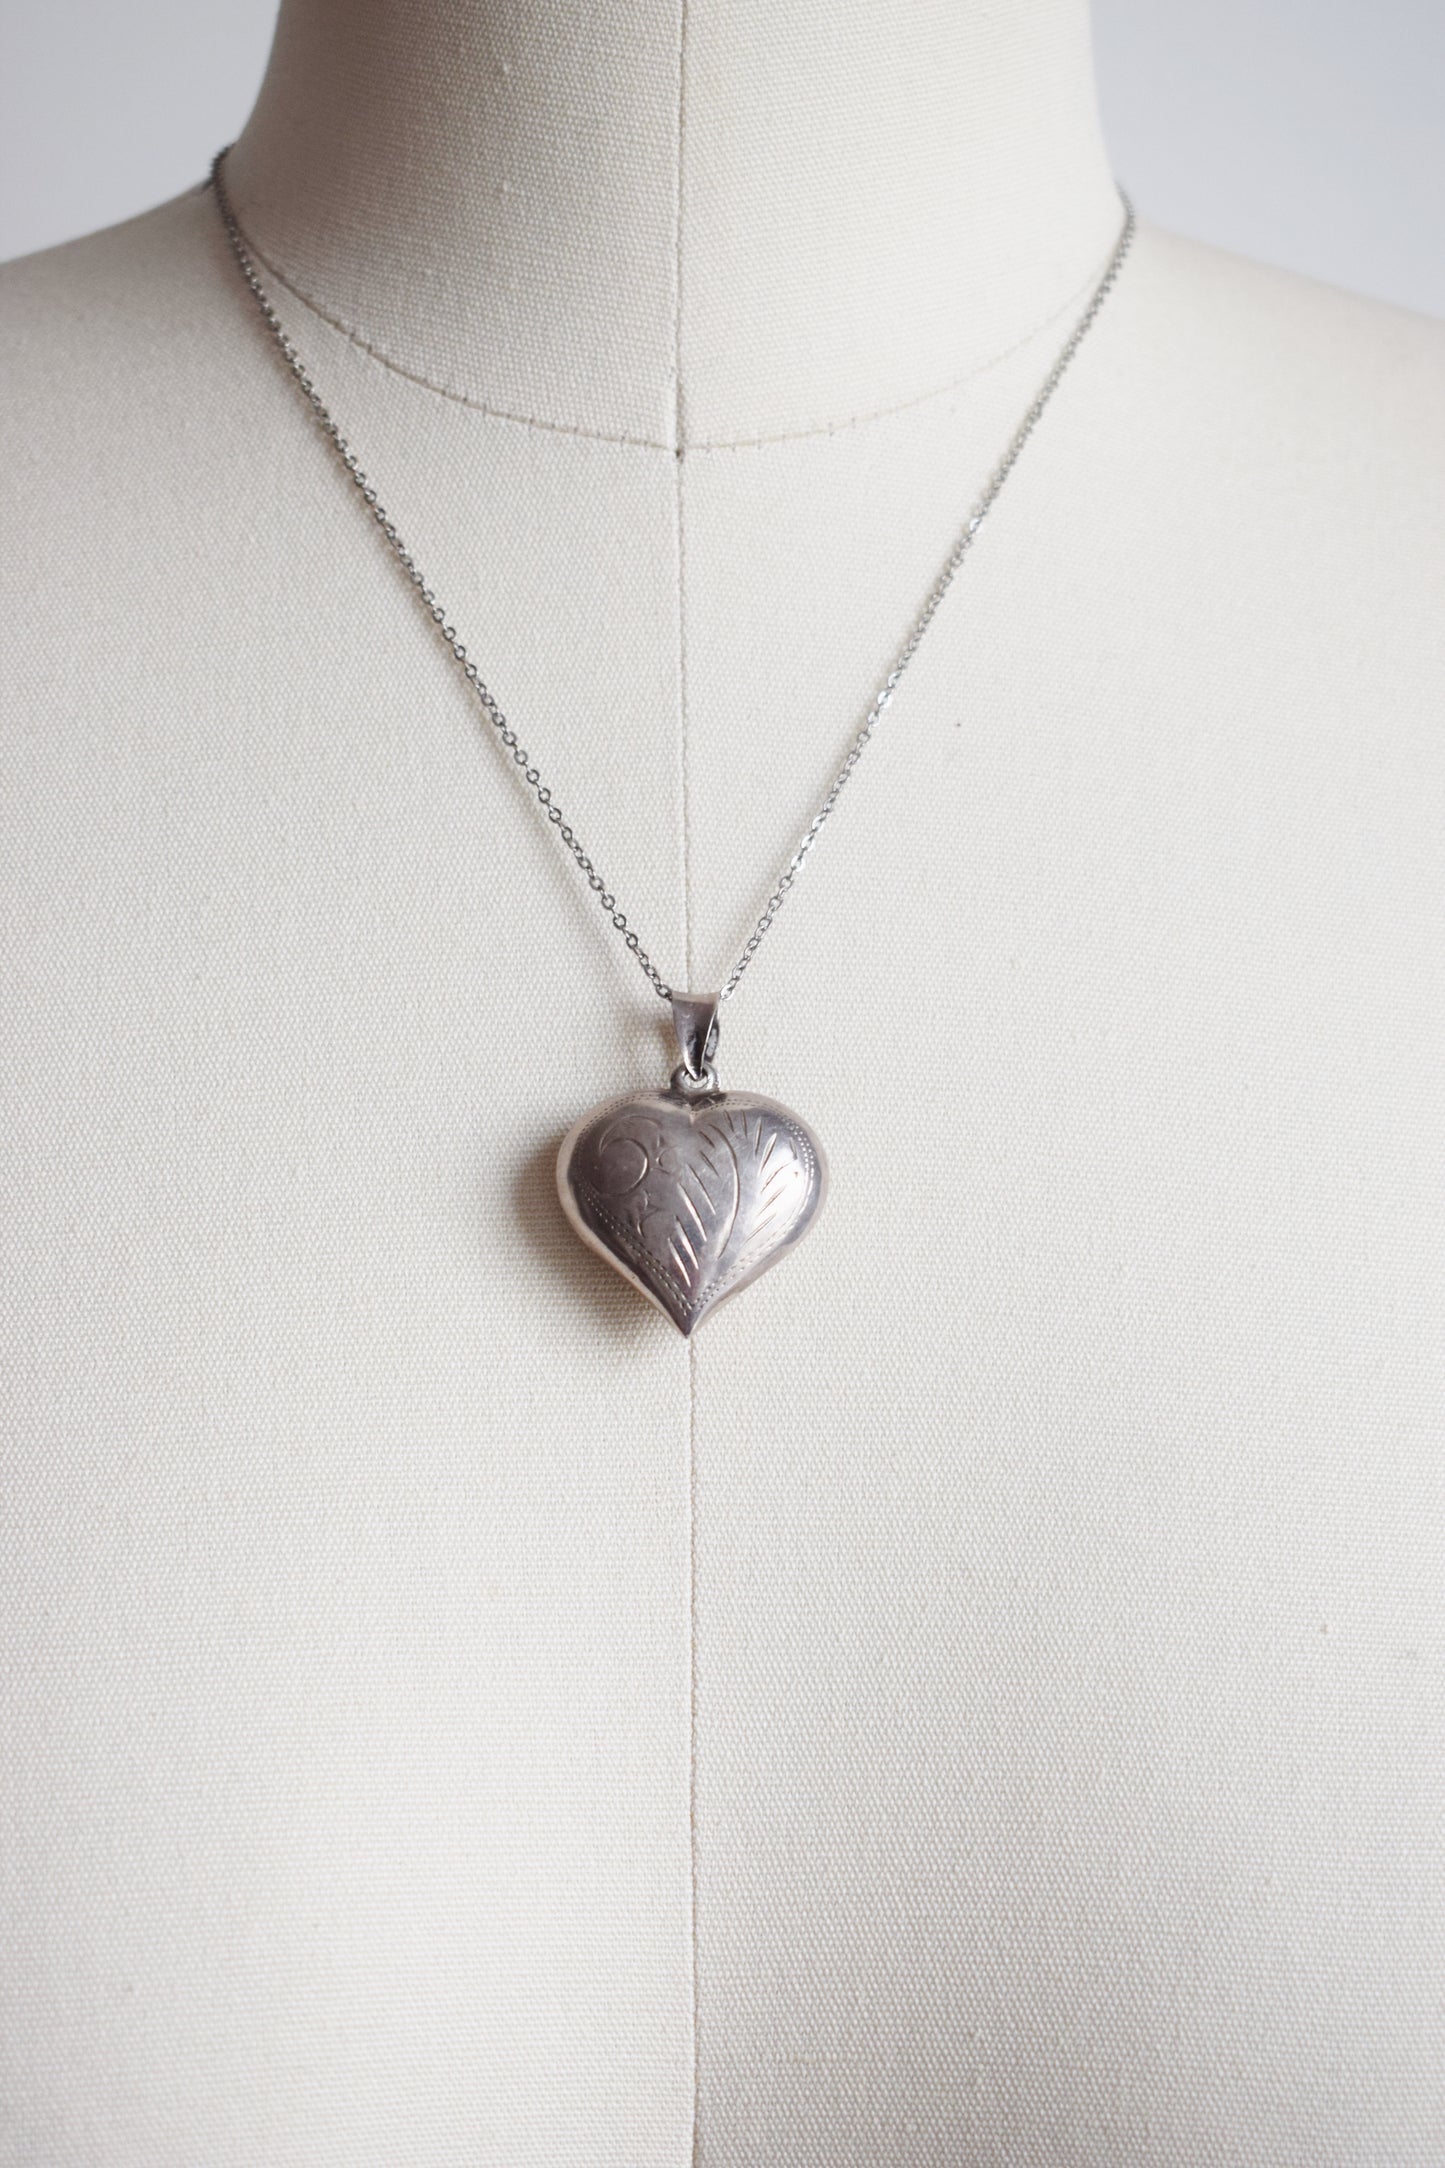 Vintage Sterling Silver Puffy Heart Pendant